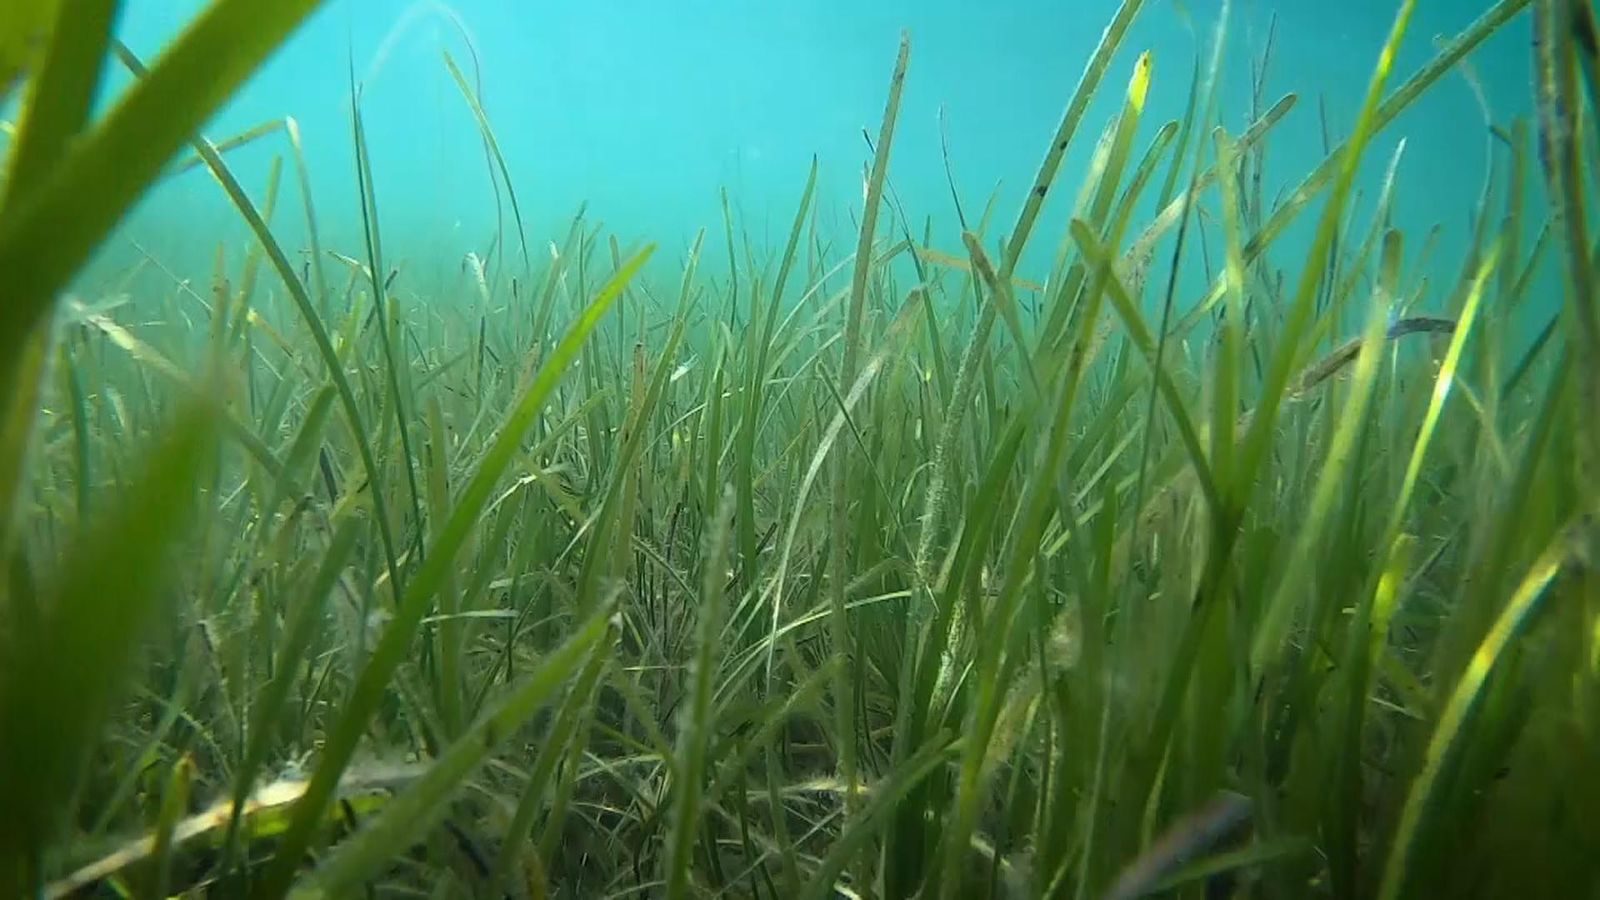 British seagrass could help tackle climate change - Sky News